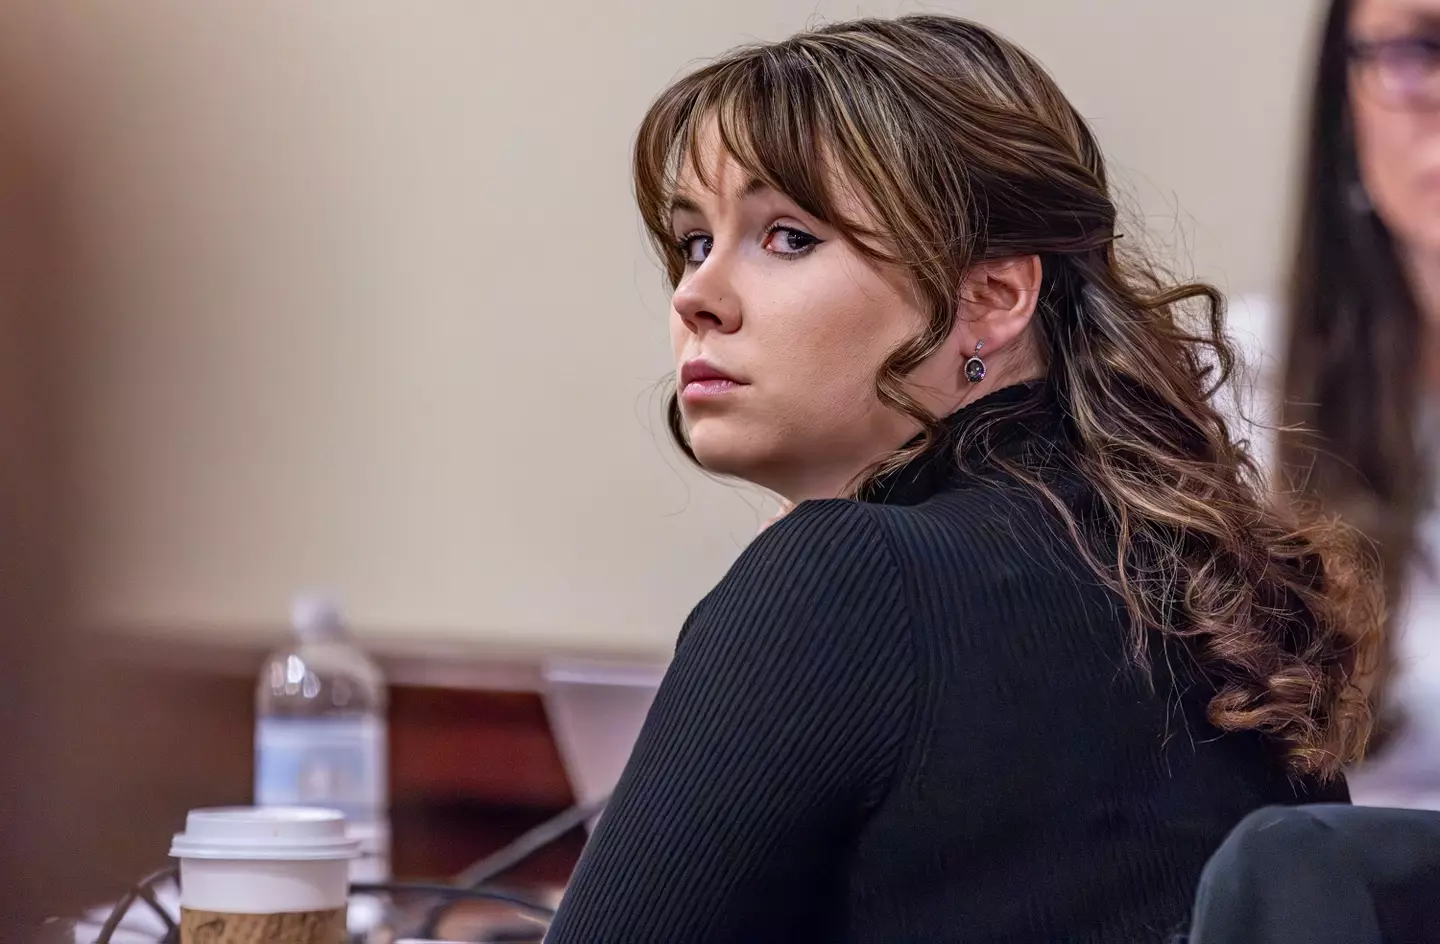 Rust armourer Hannah Gutierrez-Reed was found guilty of involuntary manslaughter. (Luis Sánchez Saturno-Pool/Getty Images)